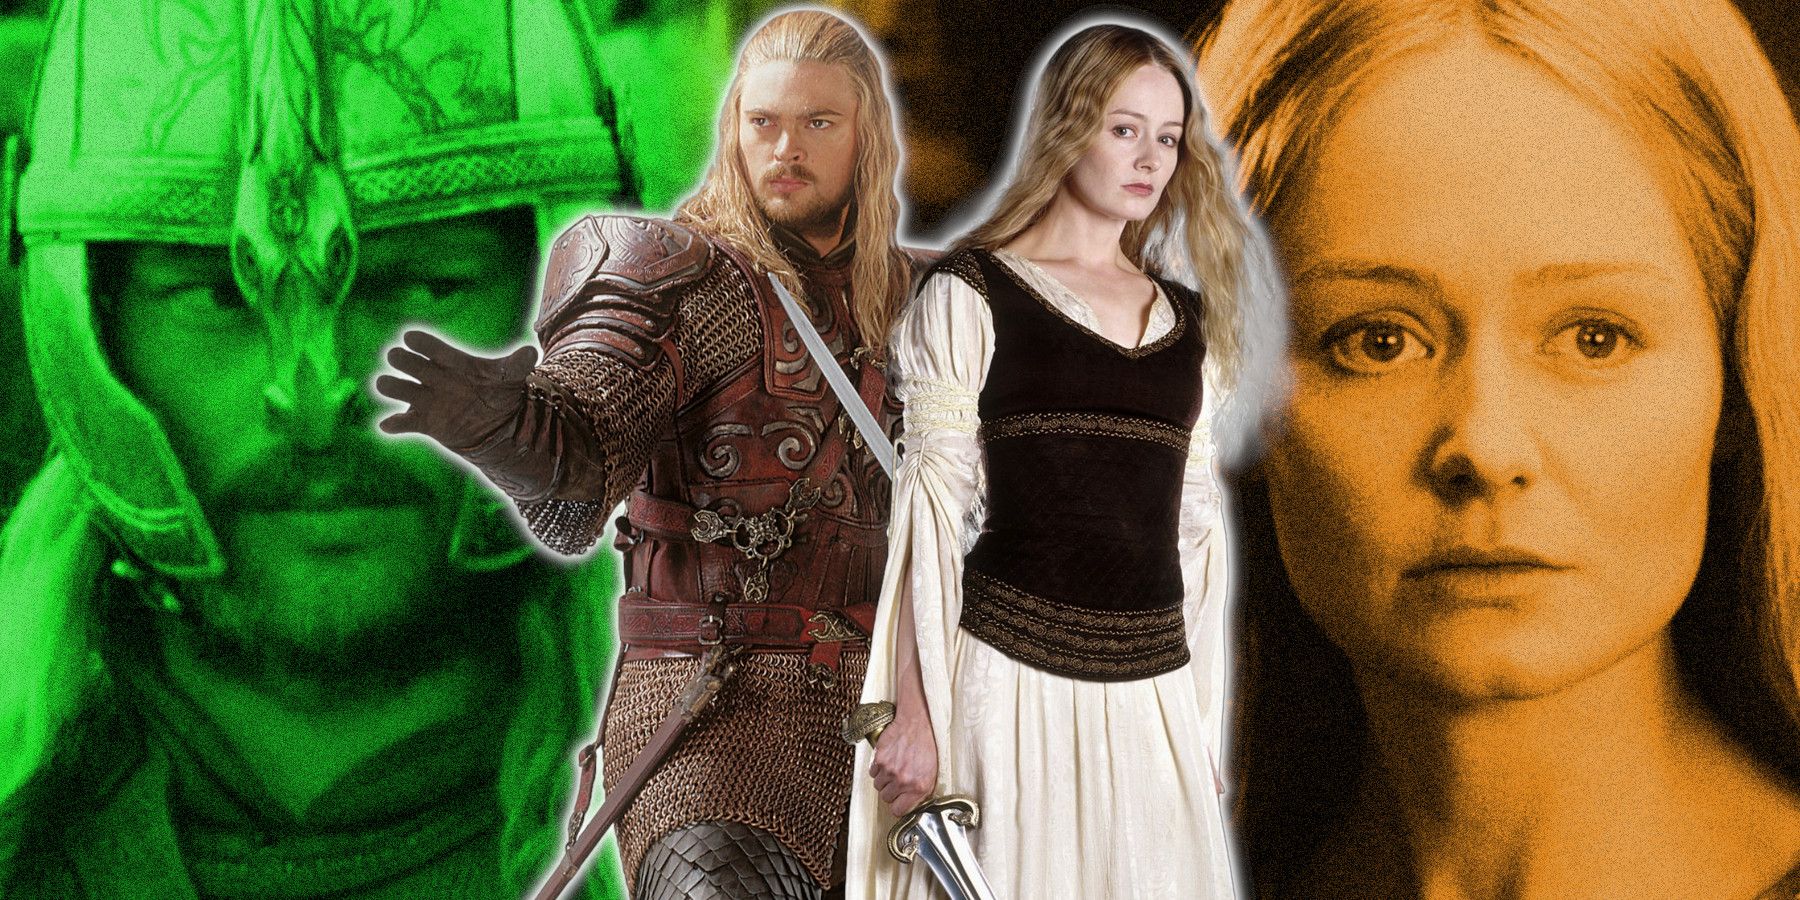 If Théoden, Éomer, and Éowyn had died, who would be king in LOTR? - Quora